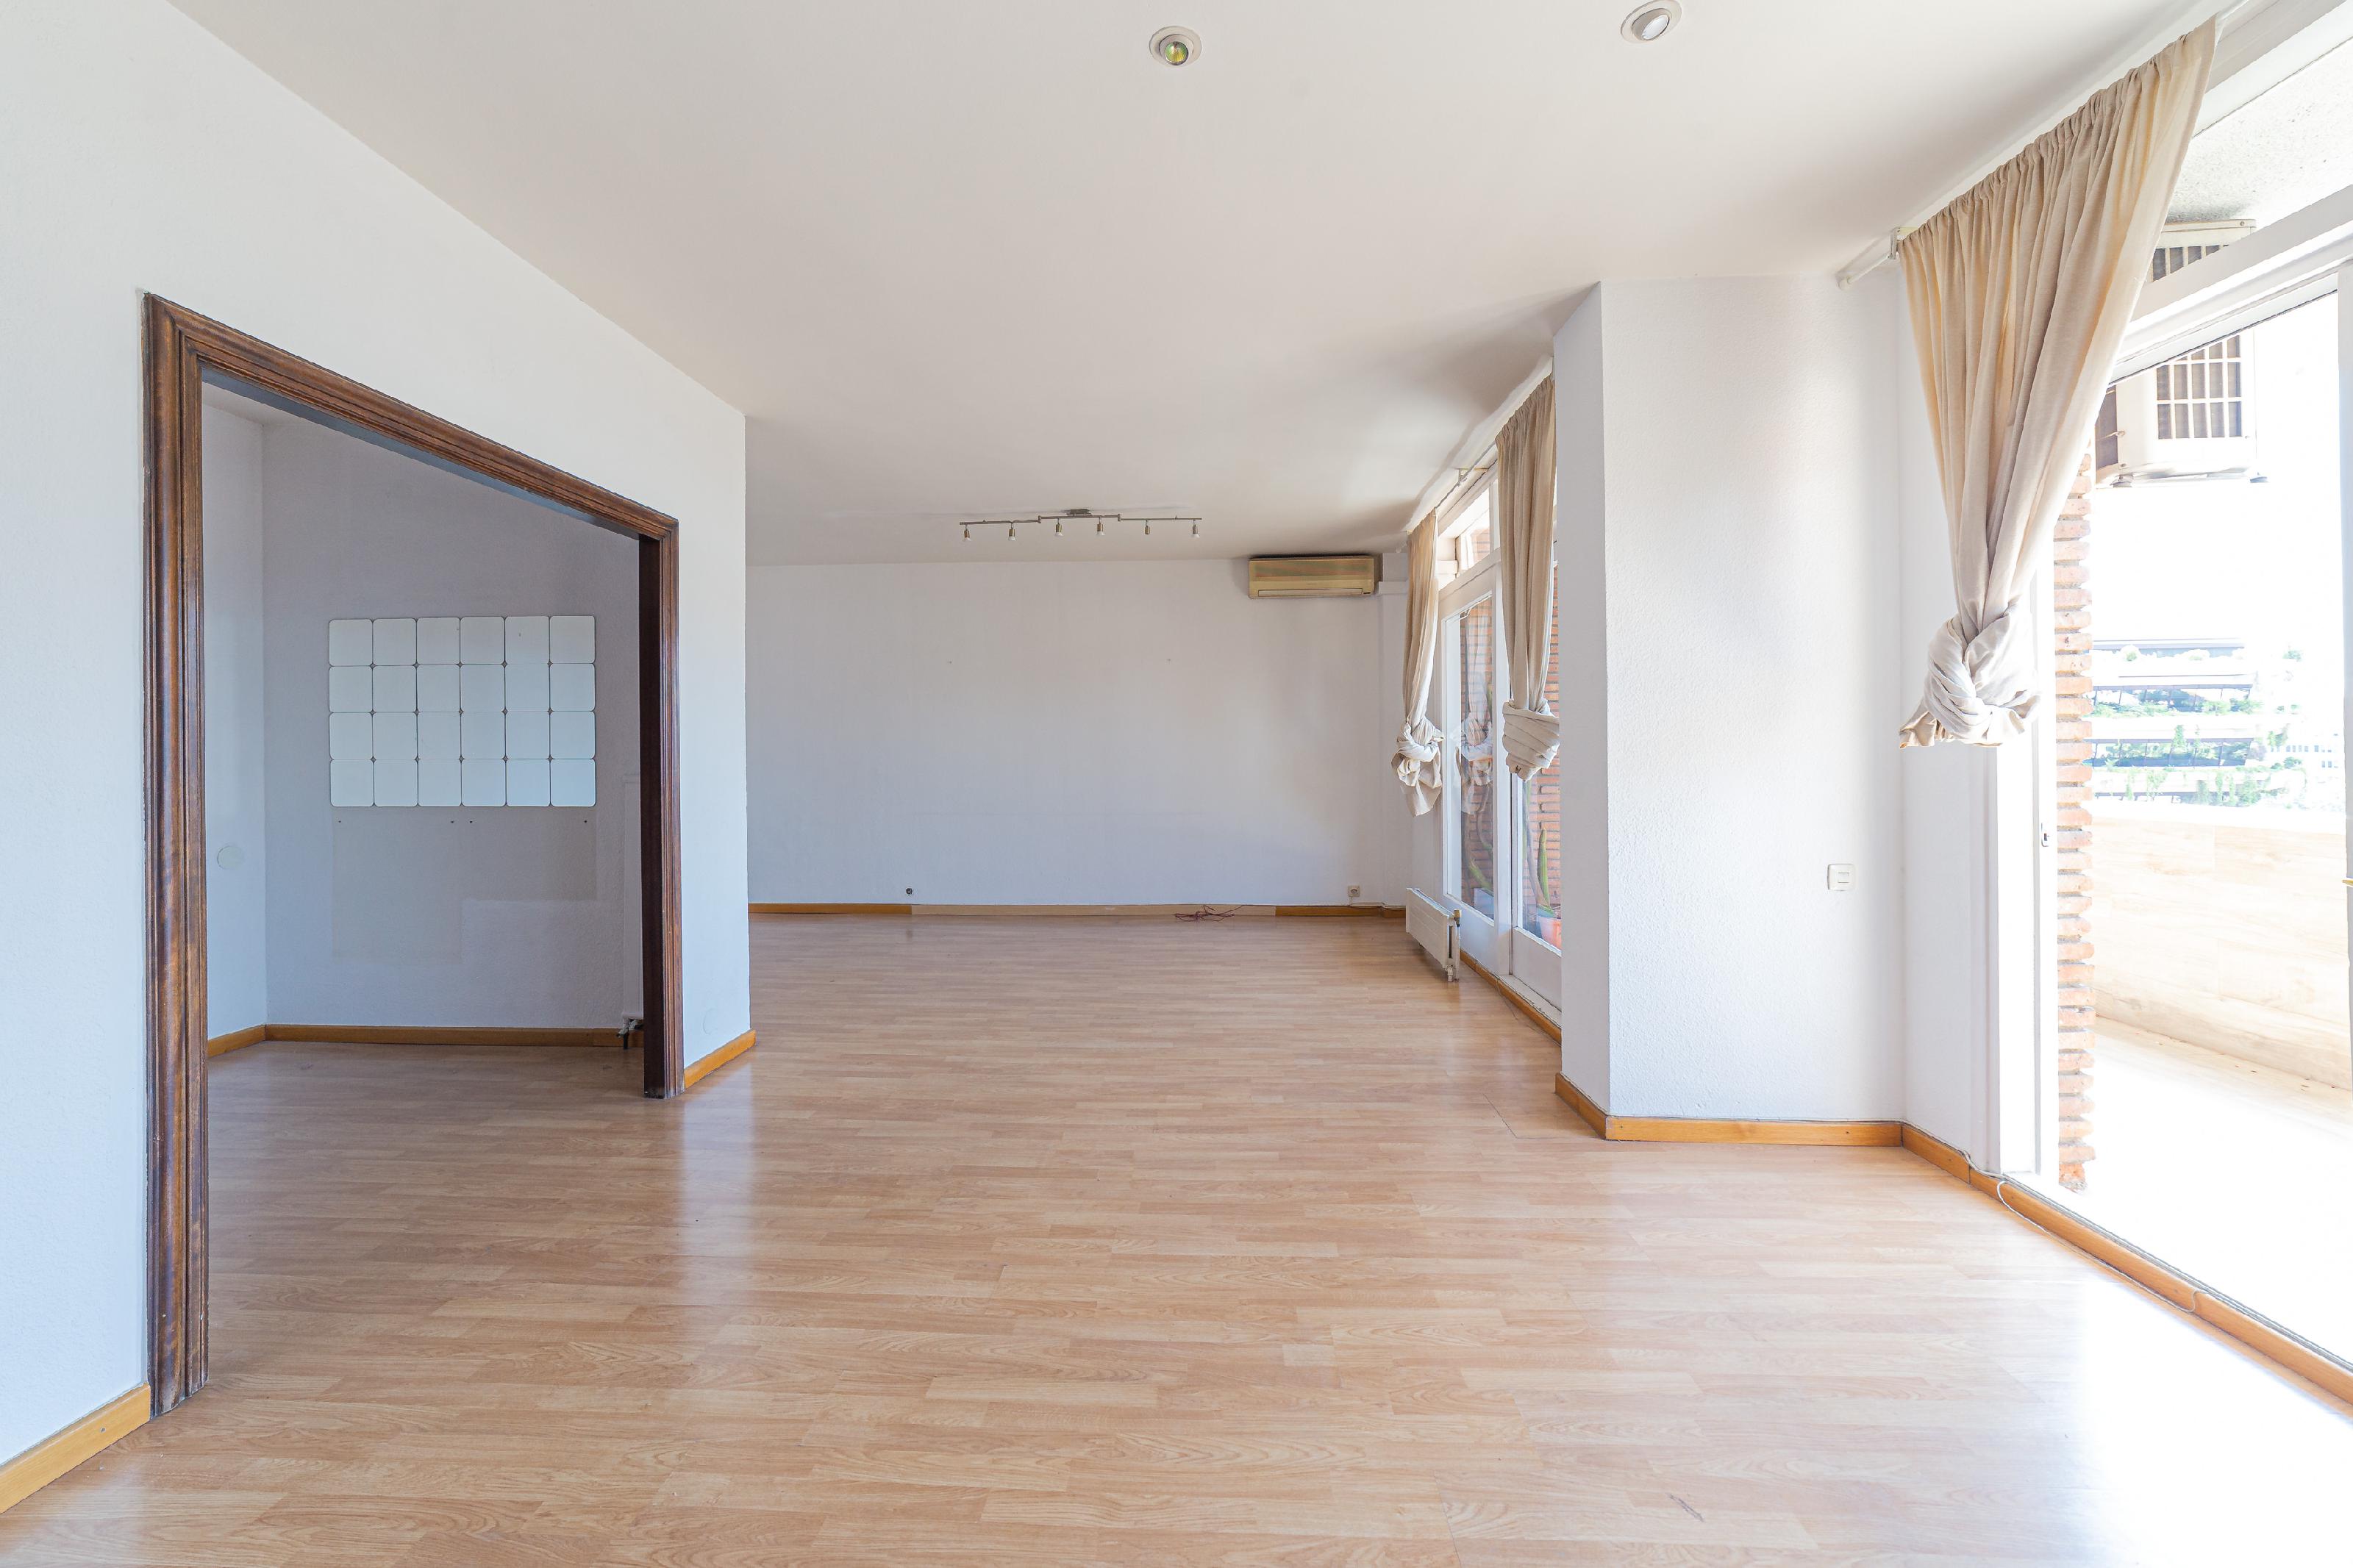 272927 Flat for sale in Les Corts, Pedralbes 8